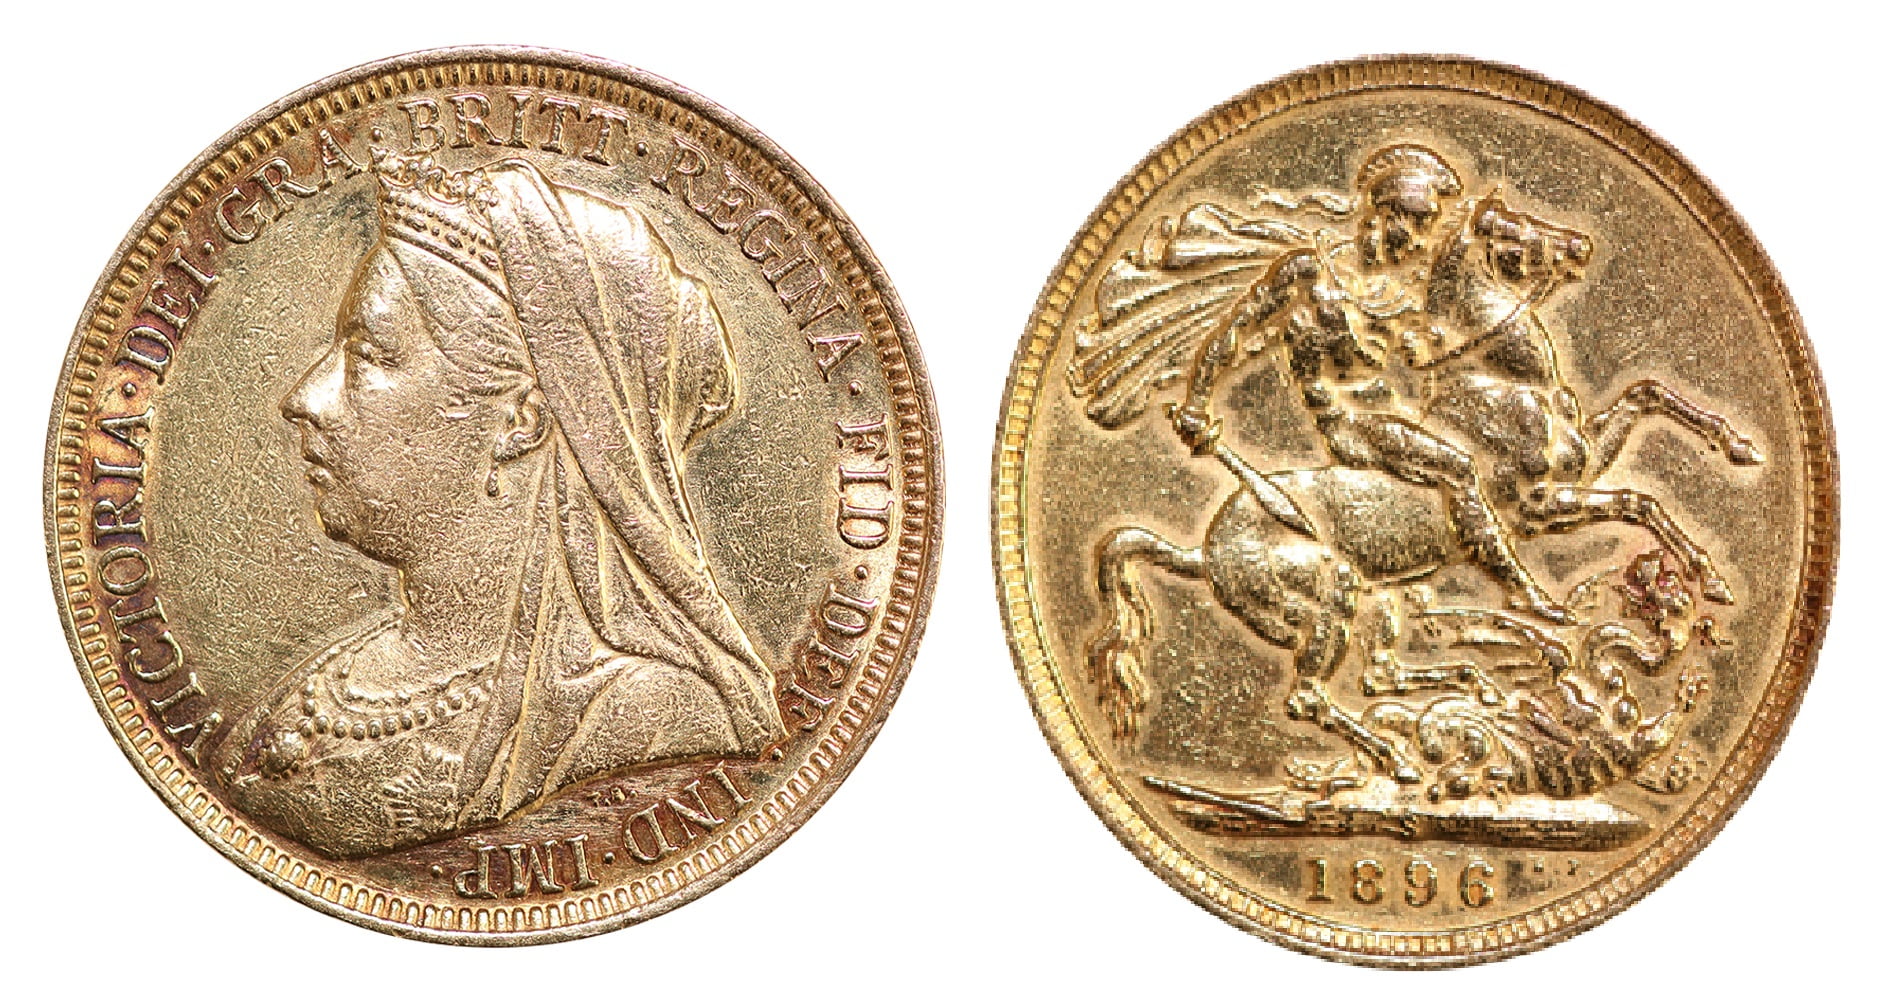 Gold Sovereing Victoria 1896 S